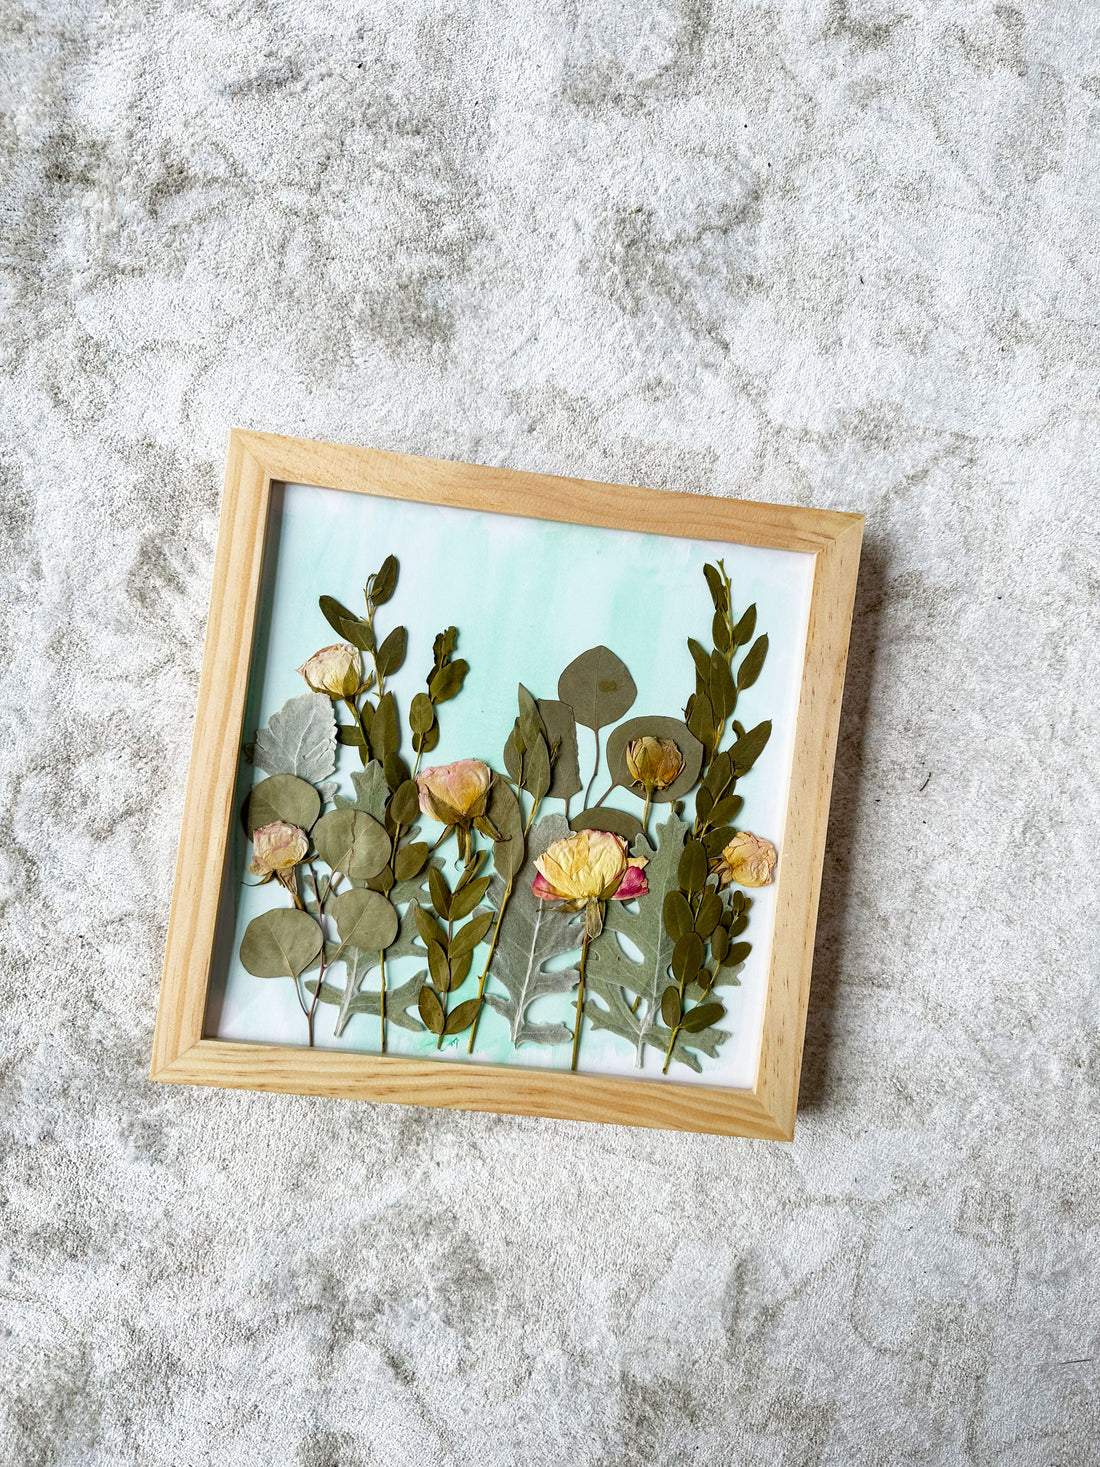 Small frame with pressed flowers in a field style design and water color background on top of a white carpet.